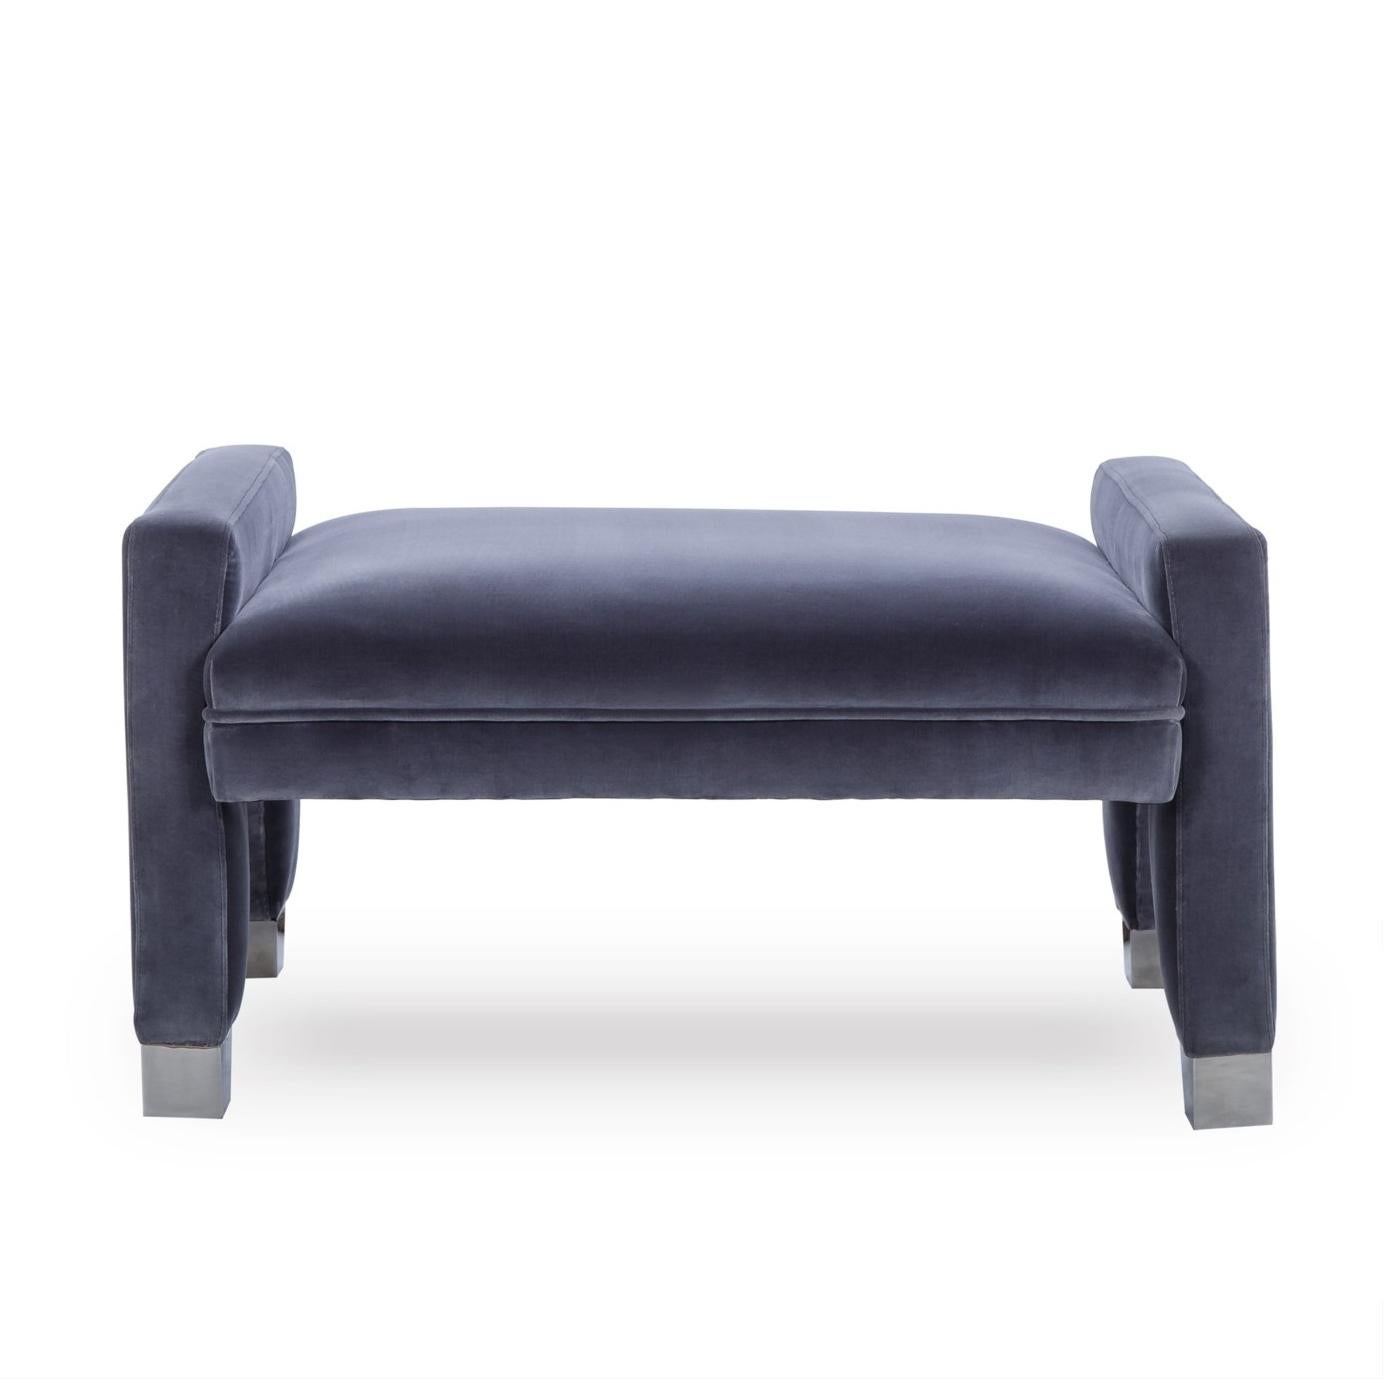 Bench Barry with structure in solid poplar
wood, upholstered and covered with faded
blue velvet fabric. With stainless steel feet.